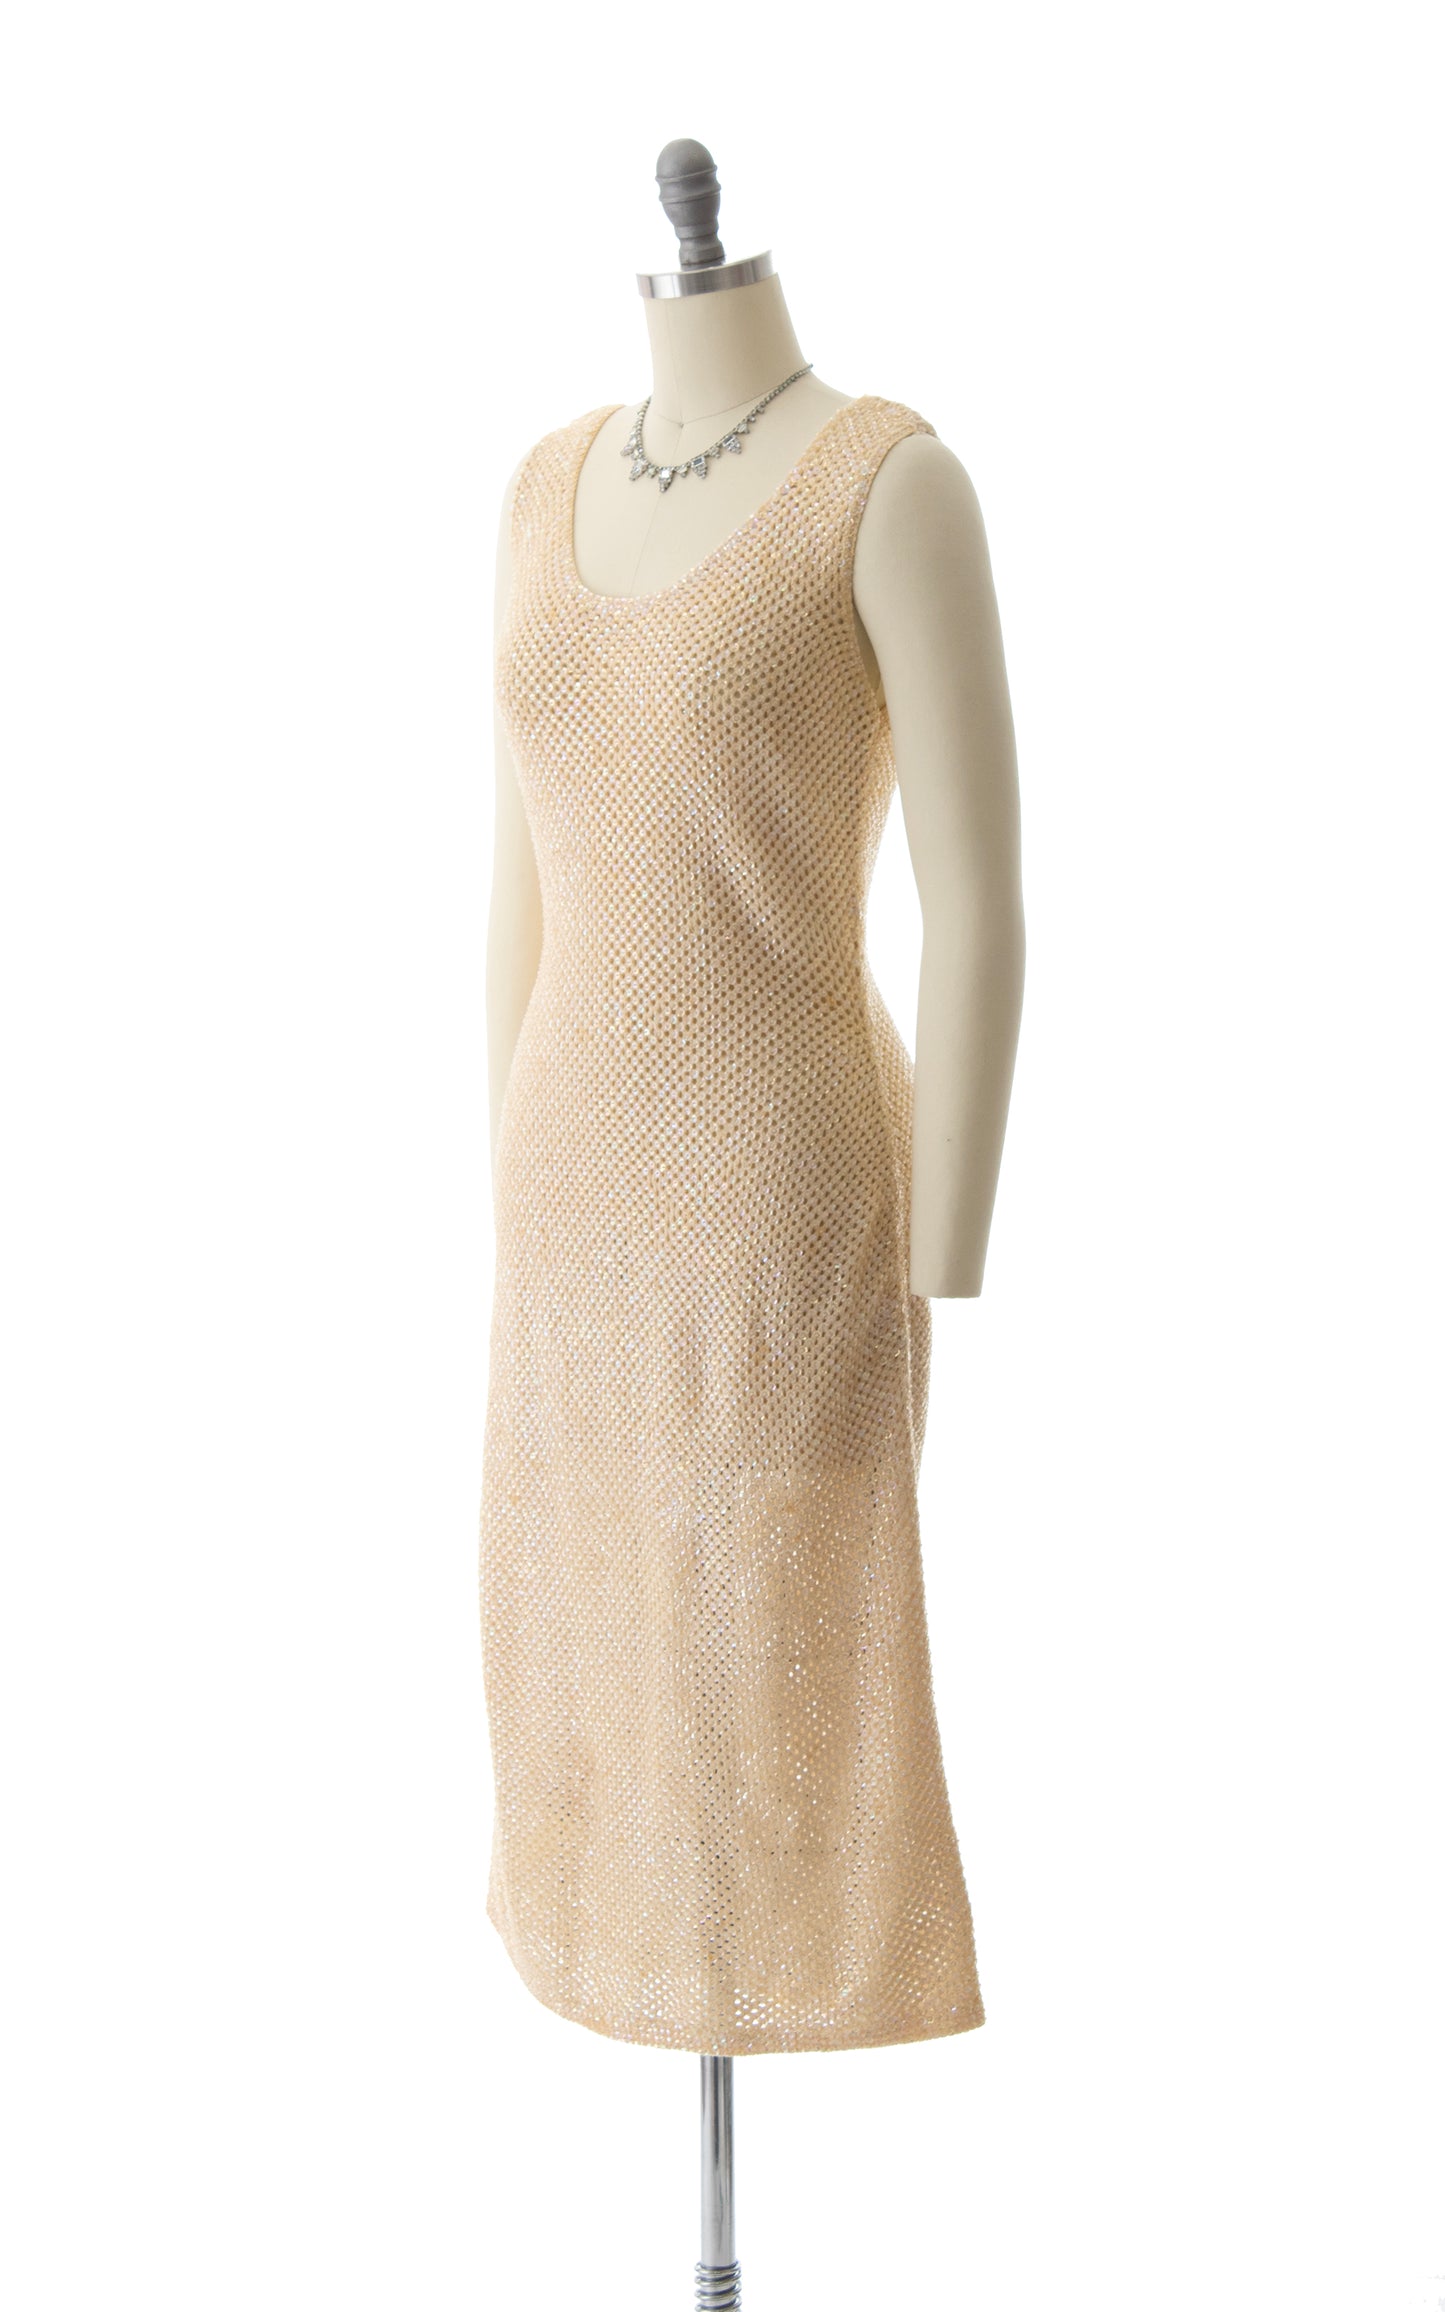 1950s Sequin Beaded Knit Wool Sweater Dress | x-small/small